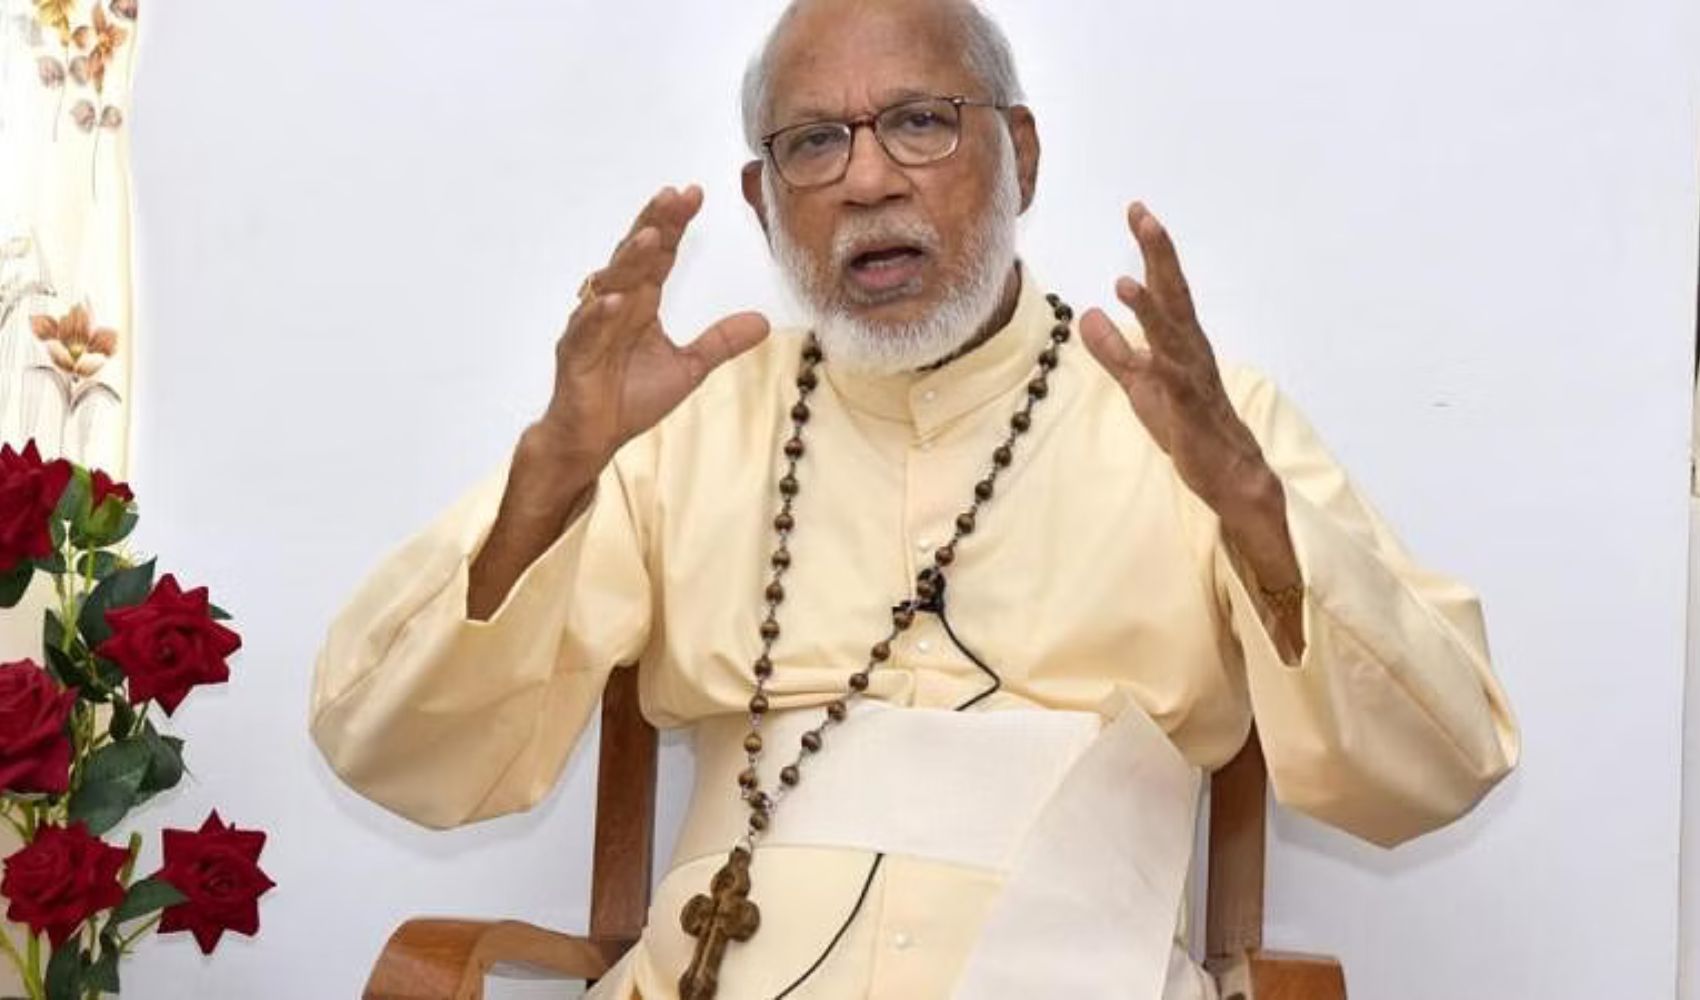 Pope Francis Accepts Resignation Of Leader Of Syro Malabar Catholics In India (Indian Express)